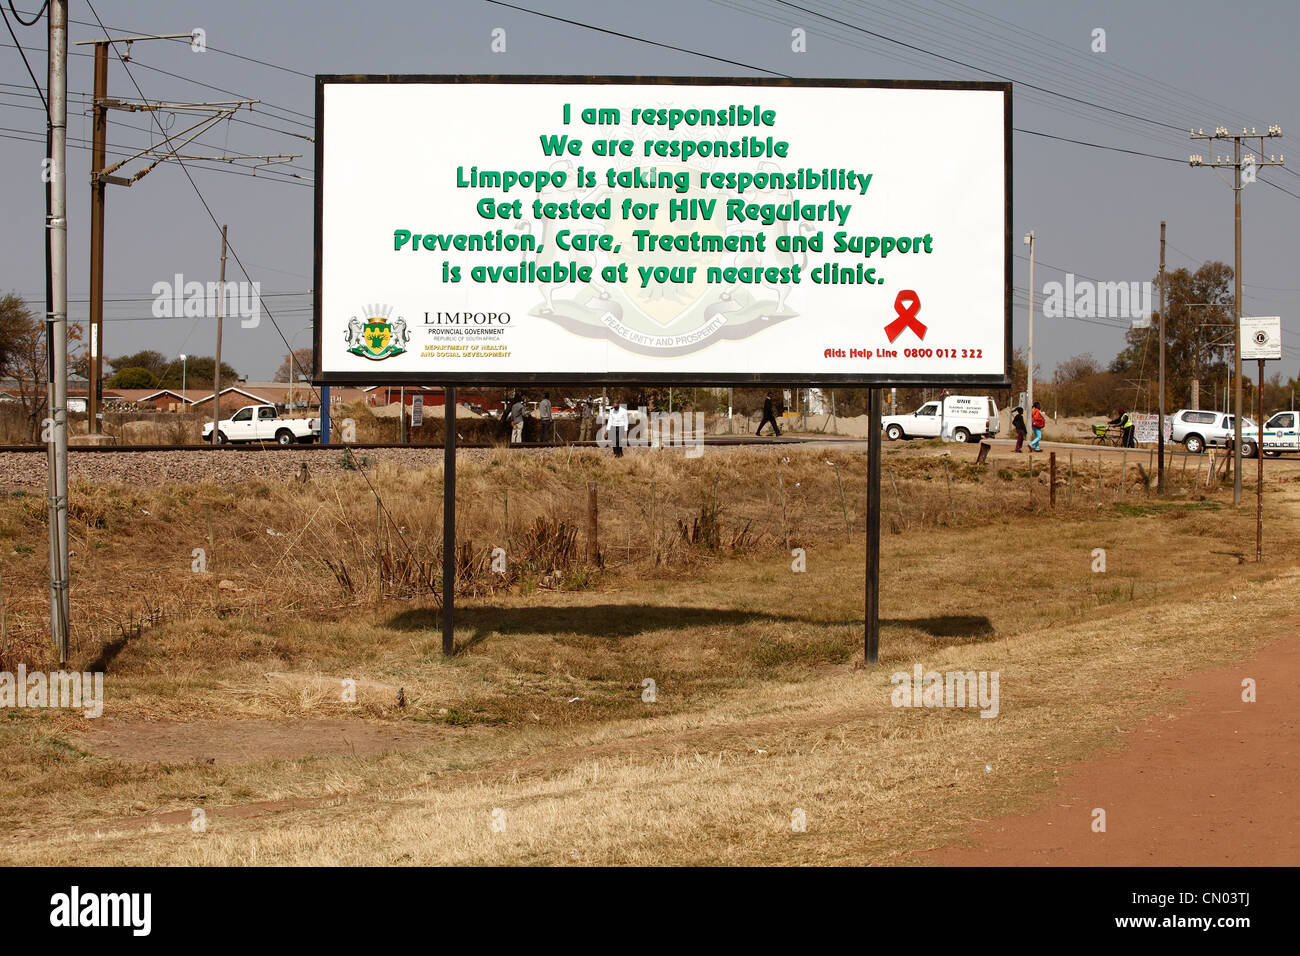 The HIV/AIDS Awareness Poster in Limpopo, RSA Stock Photo